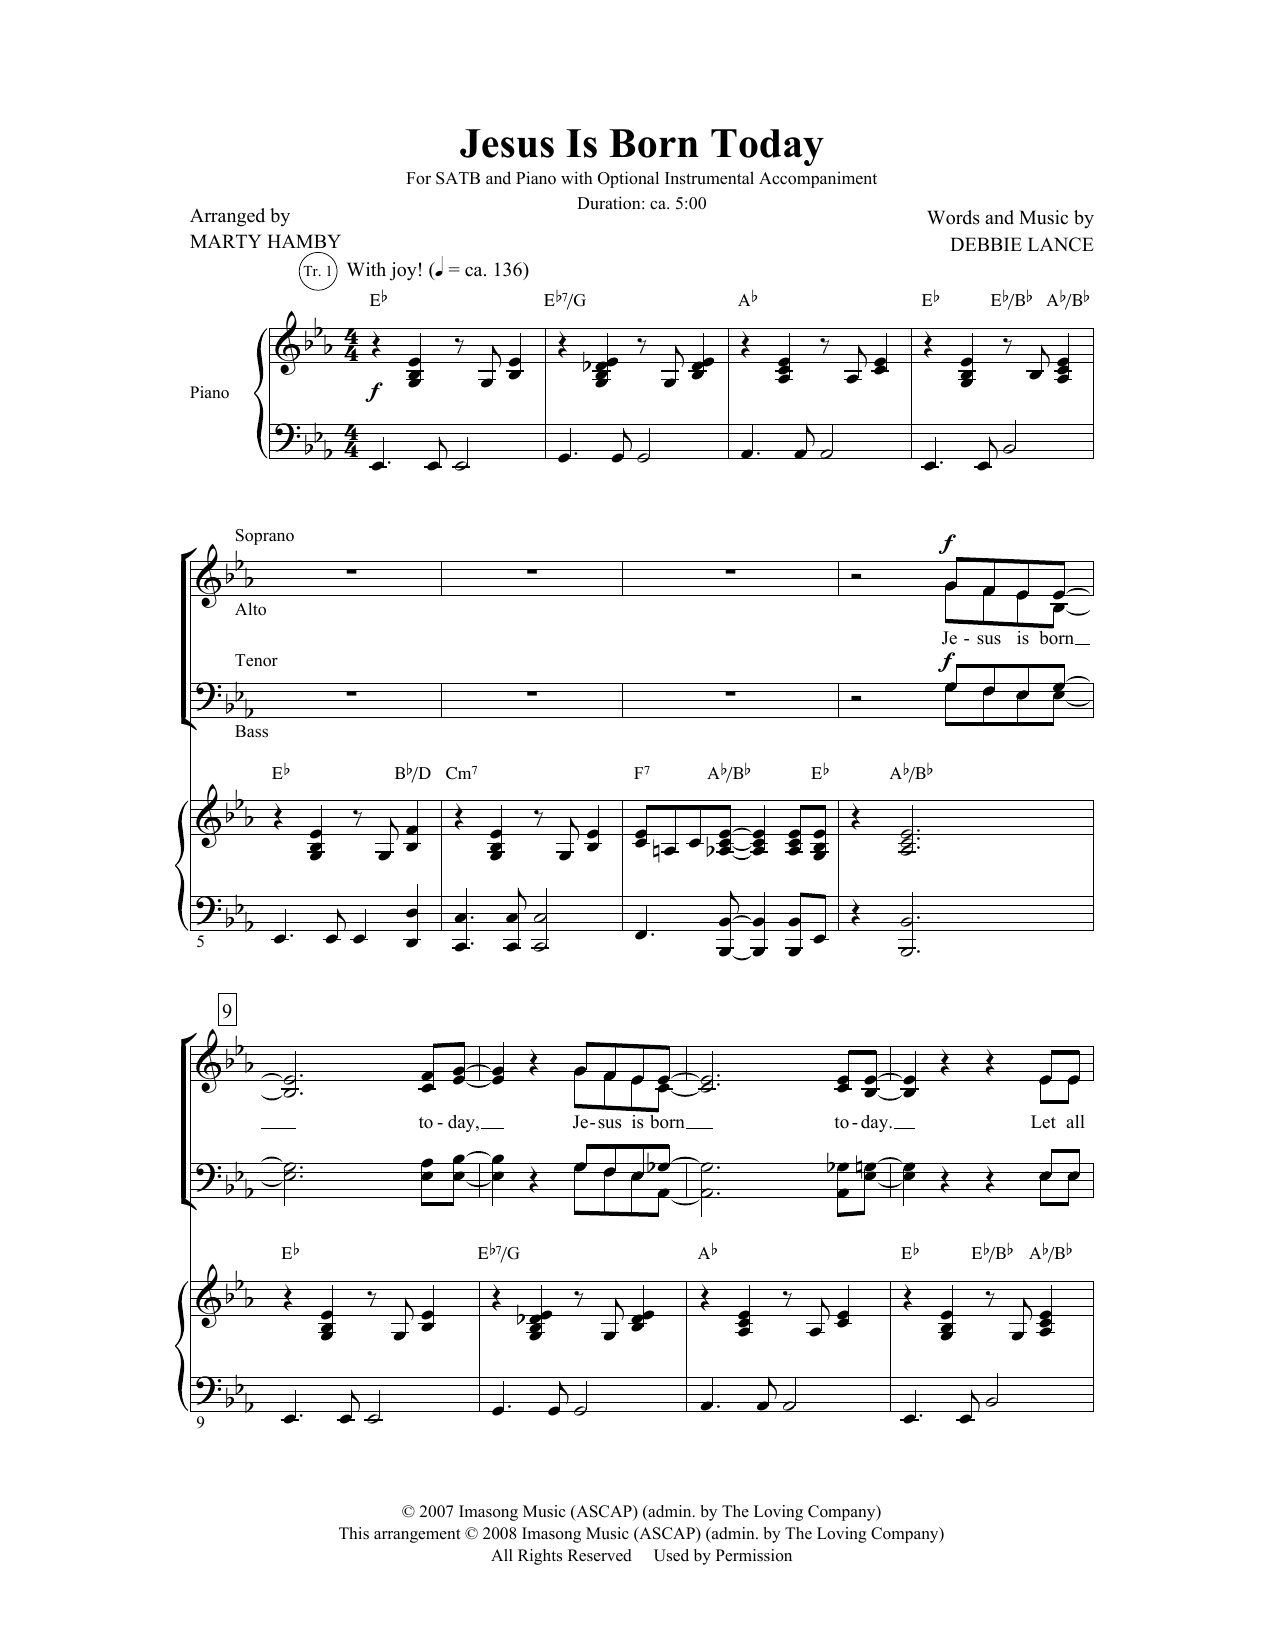 Download Debbie Lance Jesus Is Born Today (arr. Marty Hamby) Sheet Music